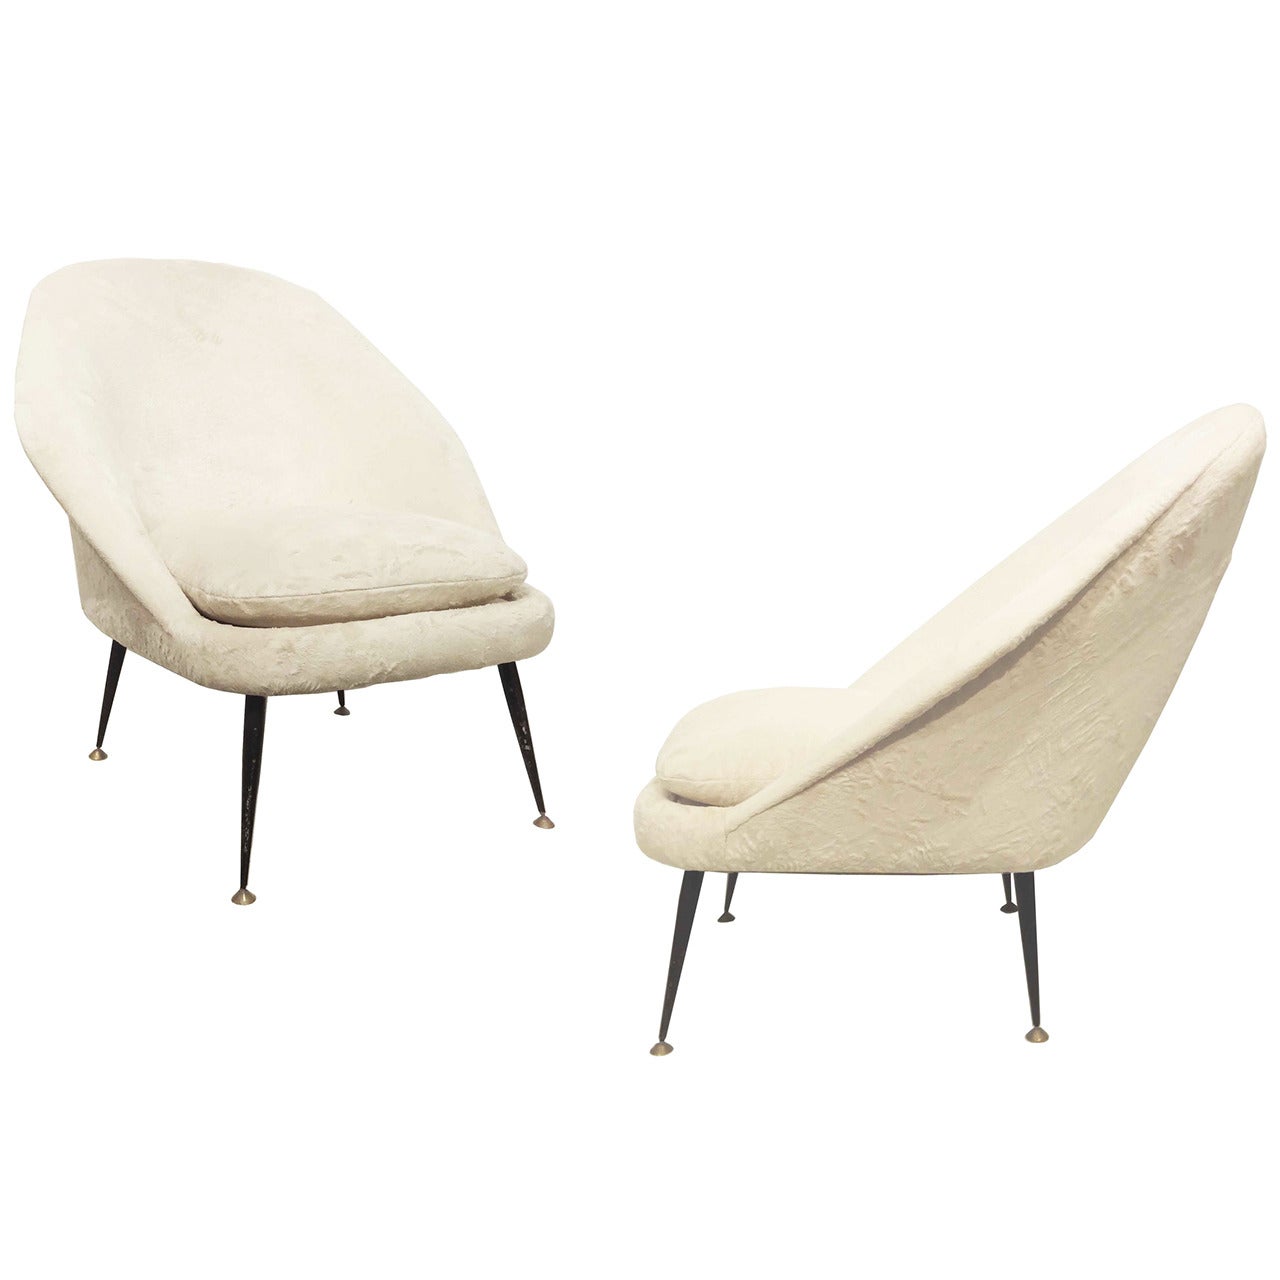 Pair of Mid Century Slipper Chairs Attributed to Pierre Guariche